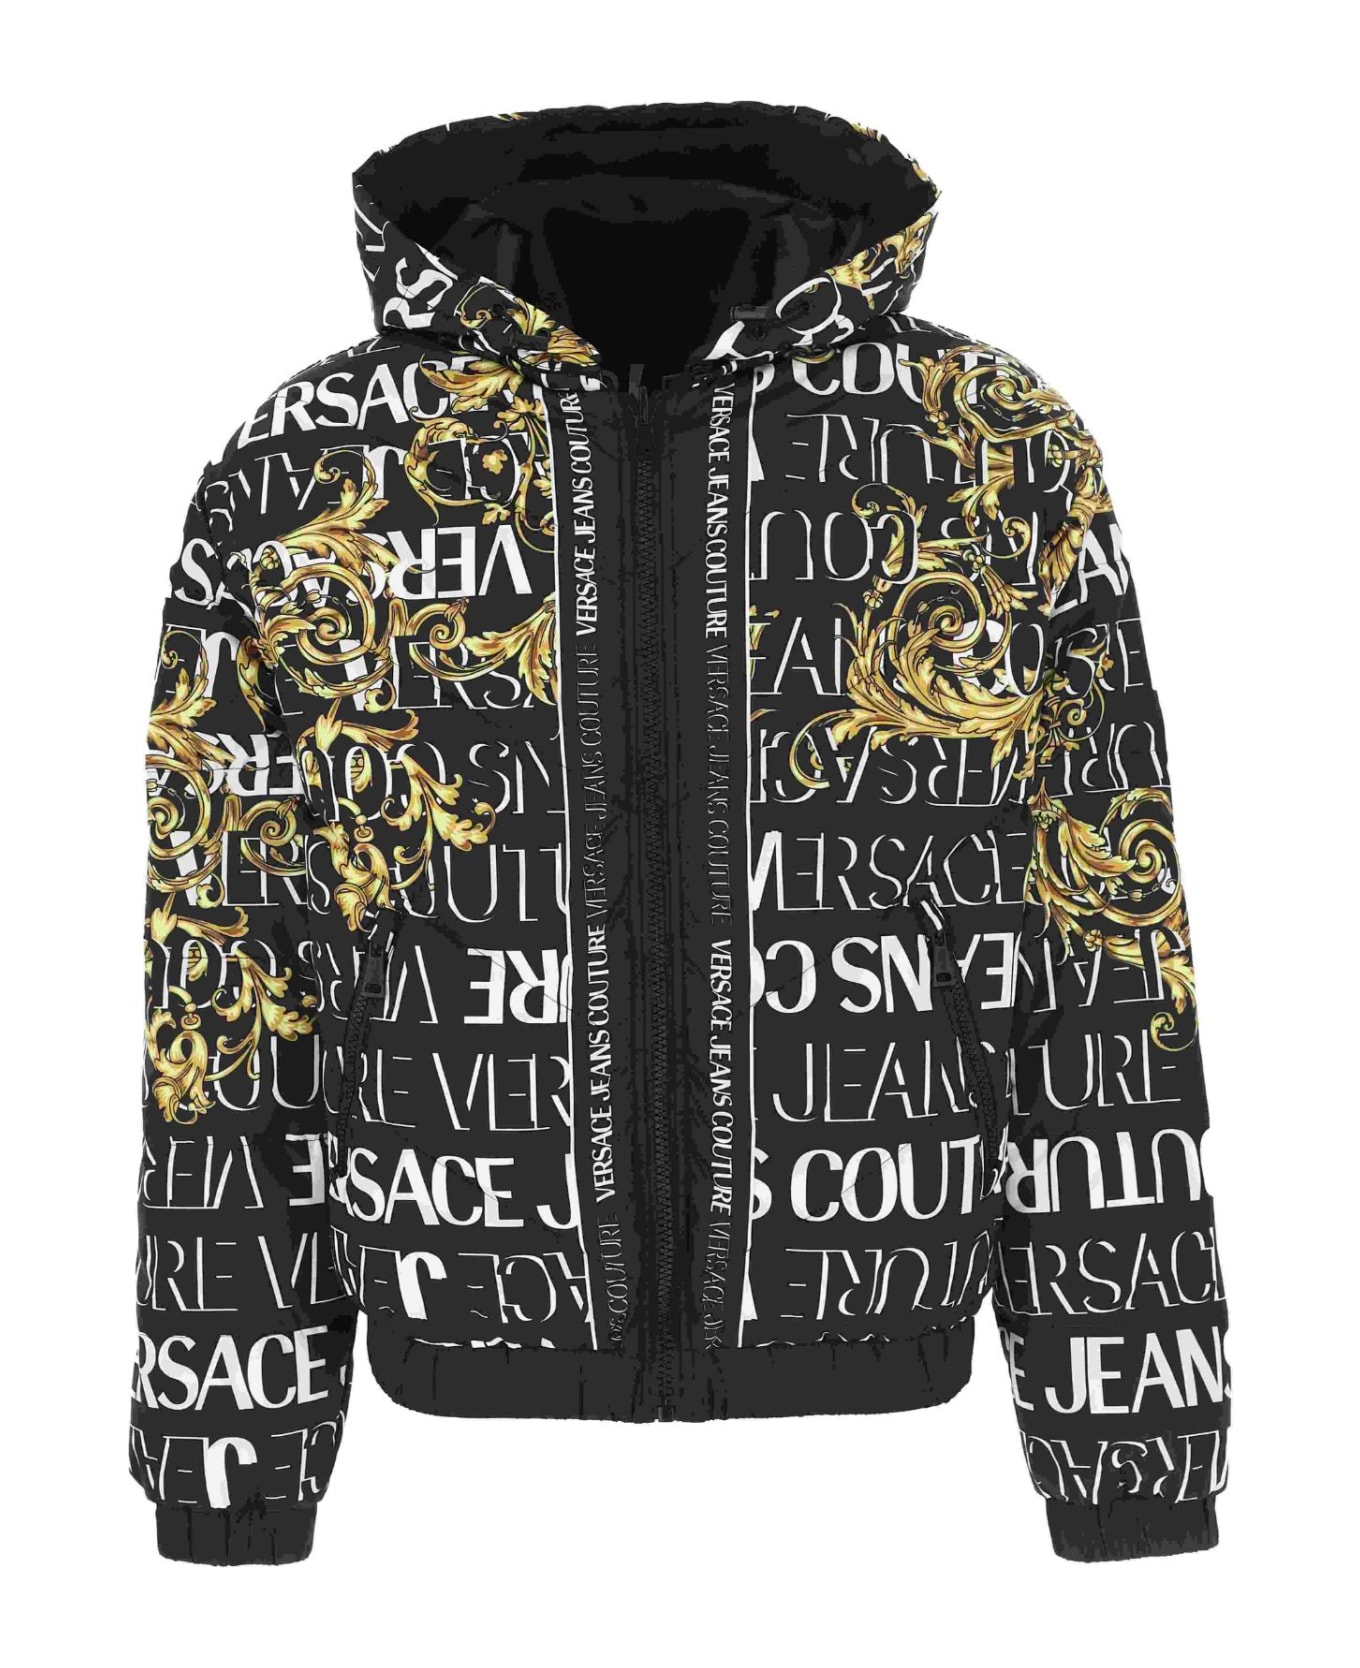 Versace Jeans Couture Reversible Down Jacket With Hood. - Black